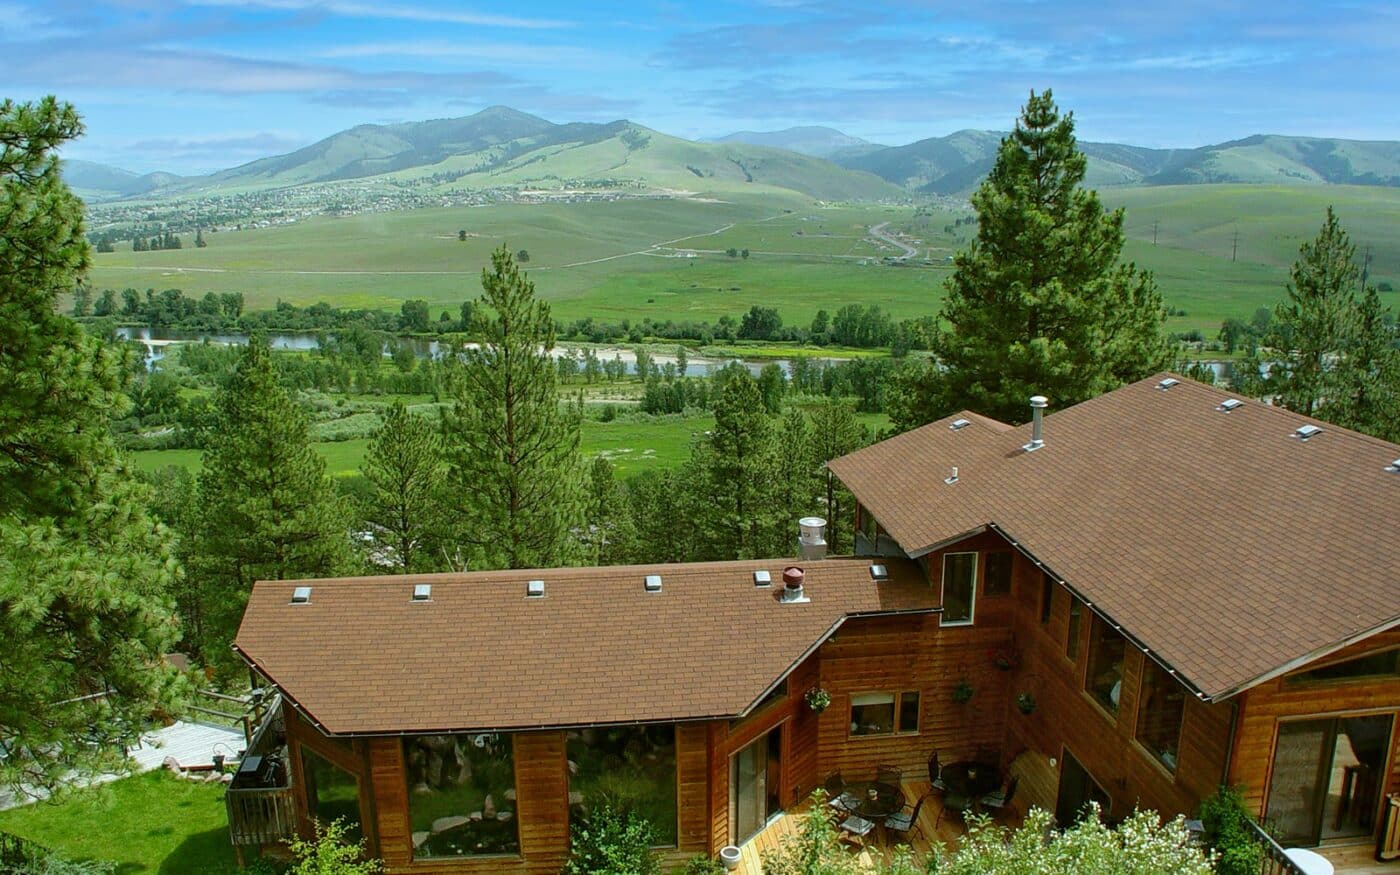 Enjoy some of the best fly fishing in Missoula, followed by a relaxing stay at this lodge-style bed and breakfast in Missoula